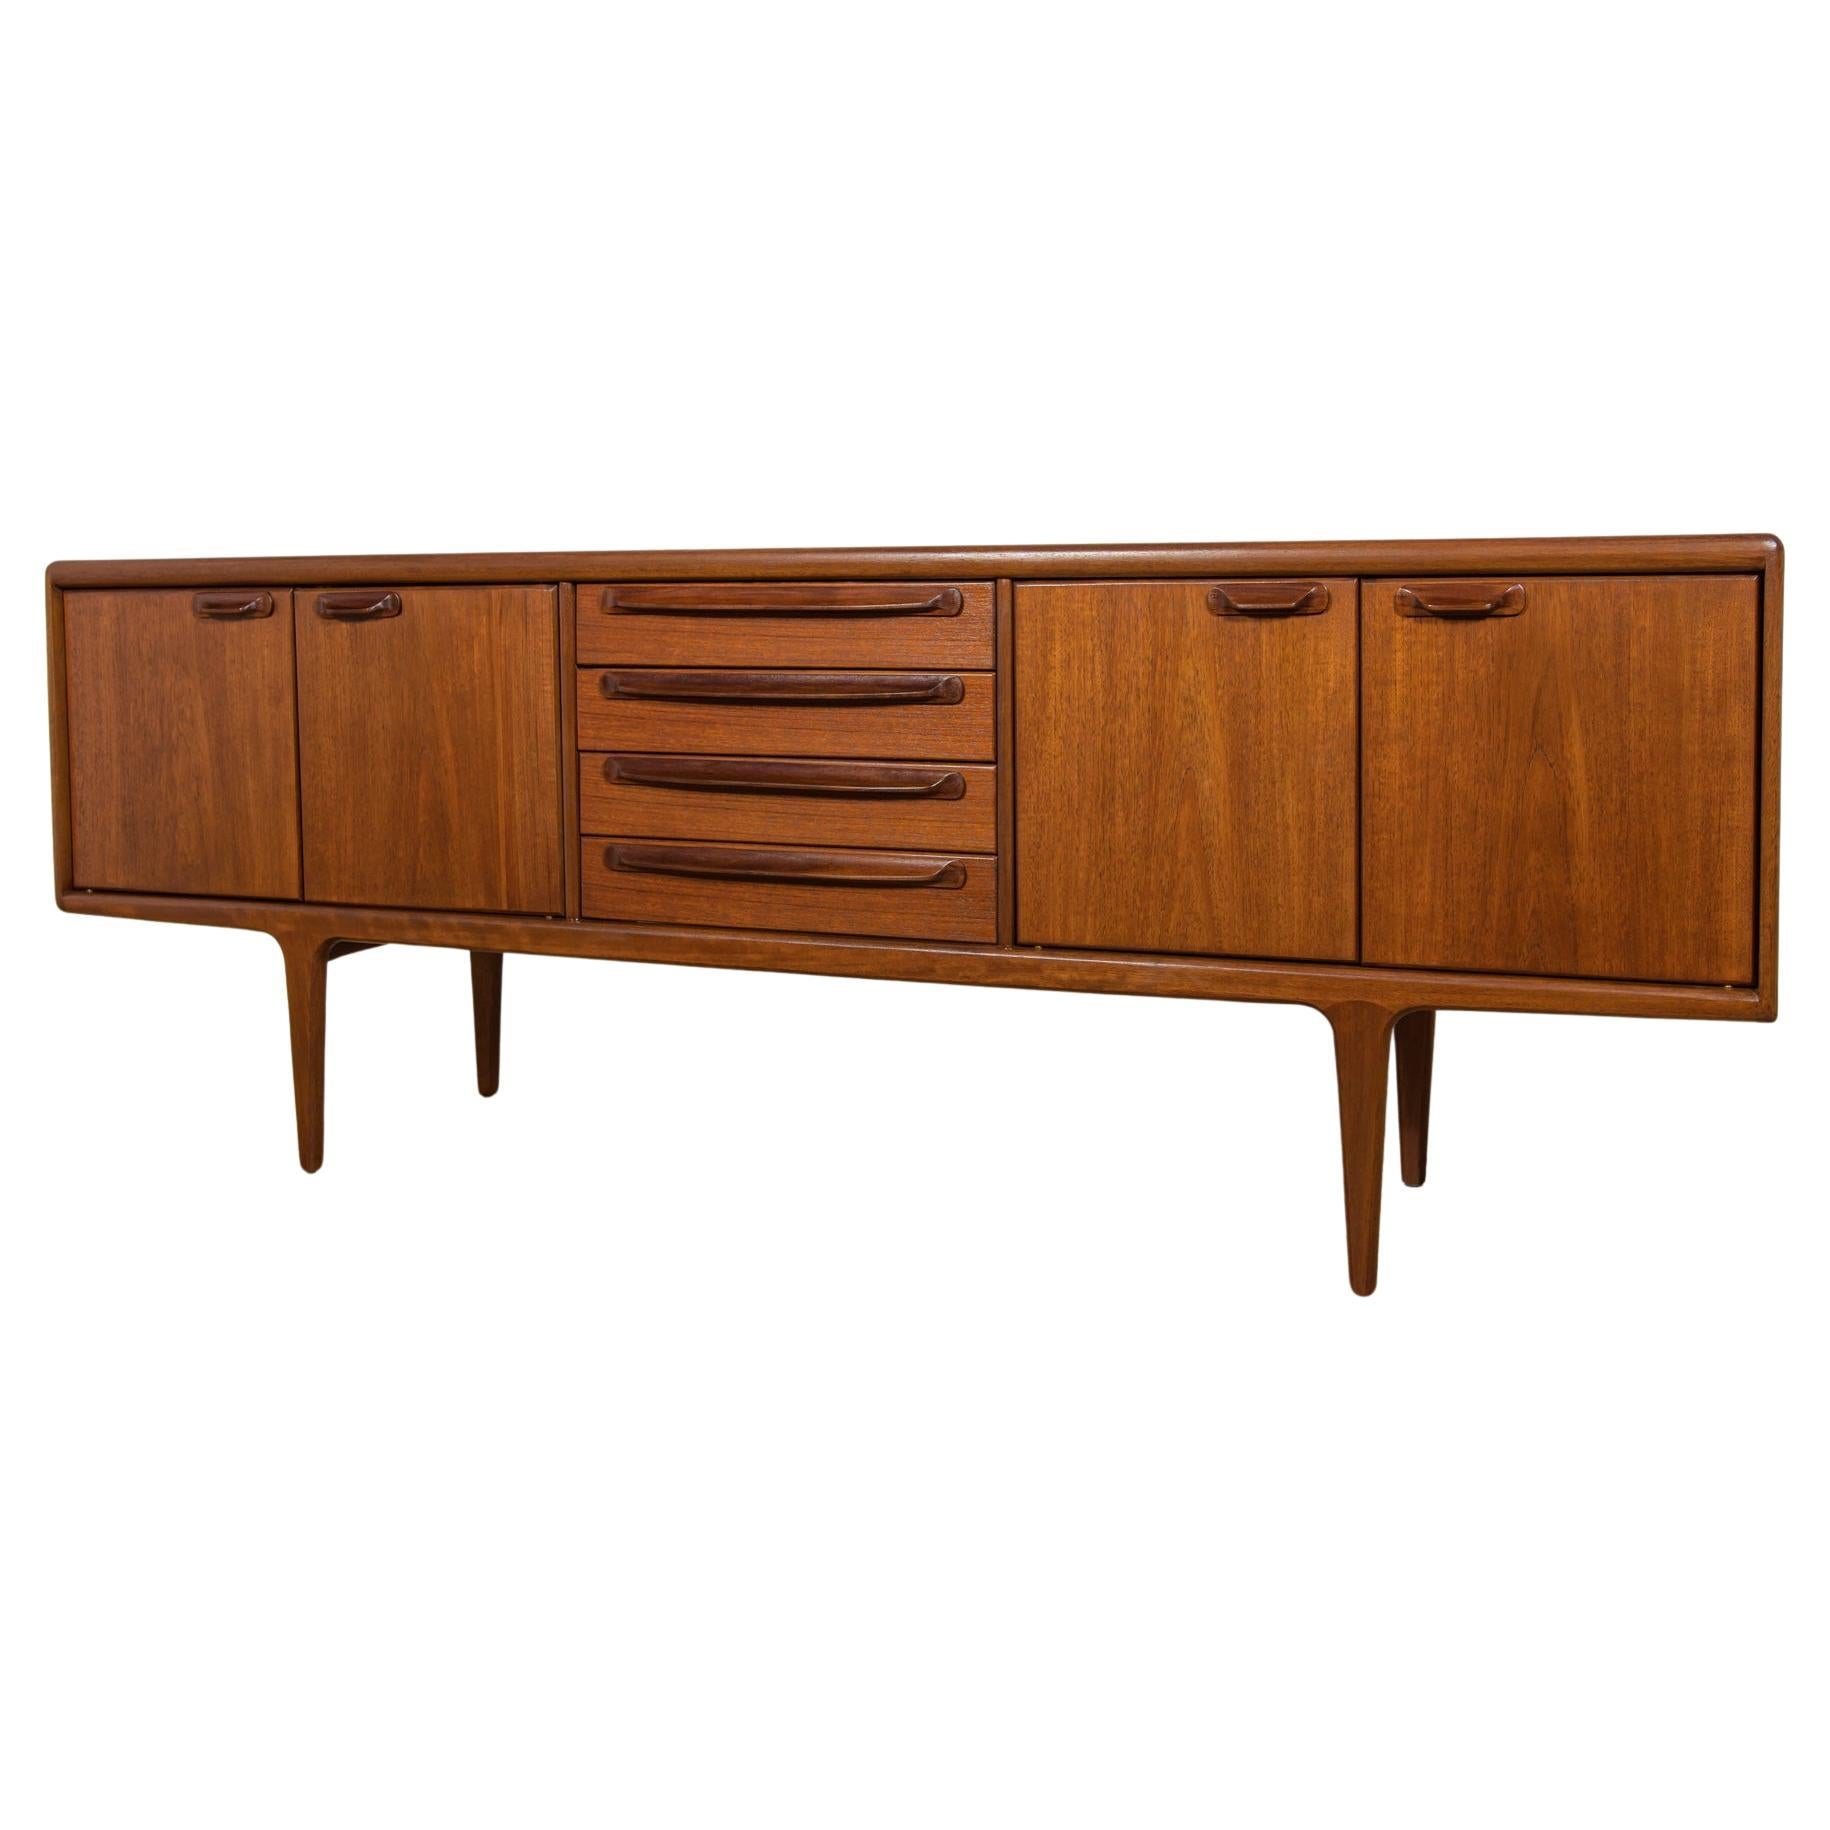 Mid-Century Teak Sideboard Model Sequence by John Herbert for A.Younger Ltd, Gre For Sale